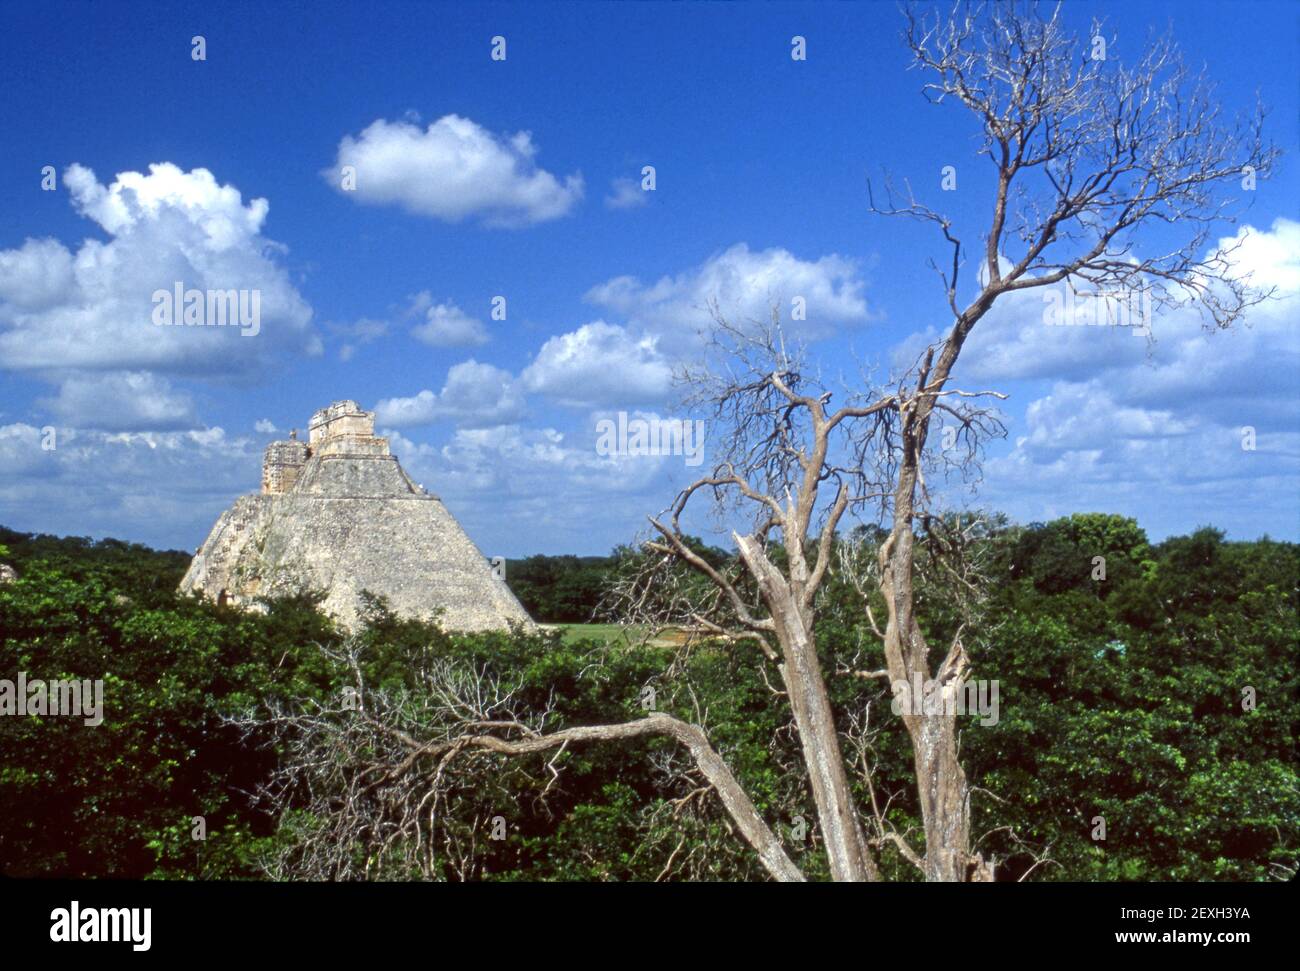 The Pyramid of the Magician in Uxmal, Mexico Stock Photo